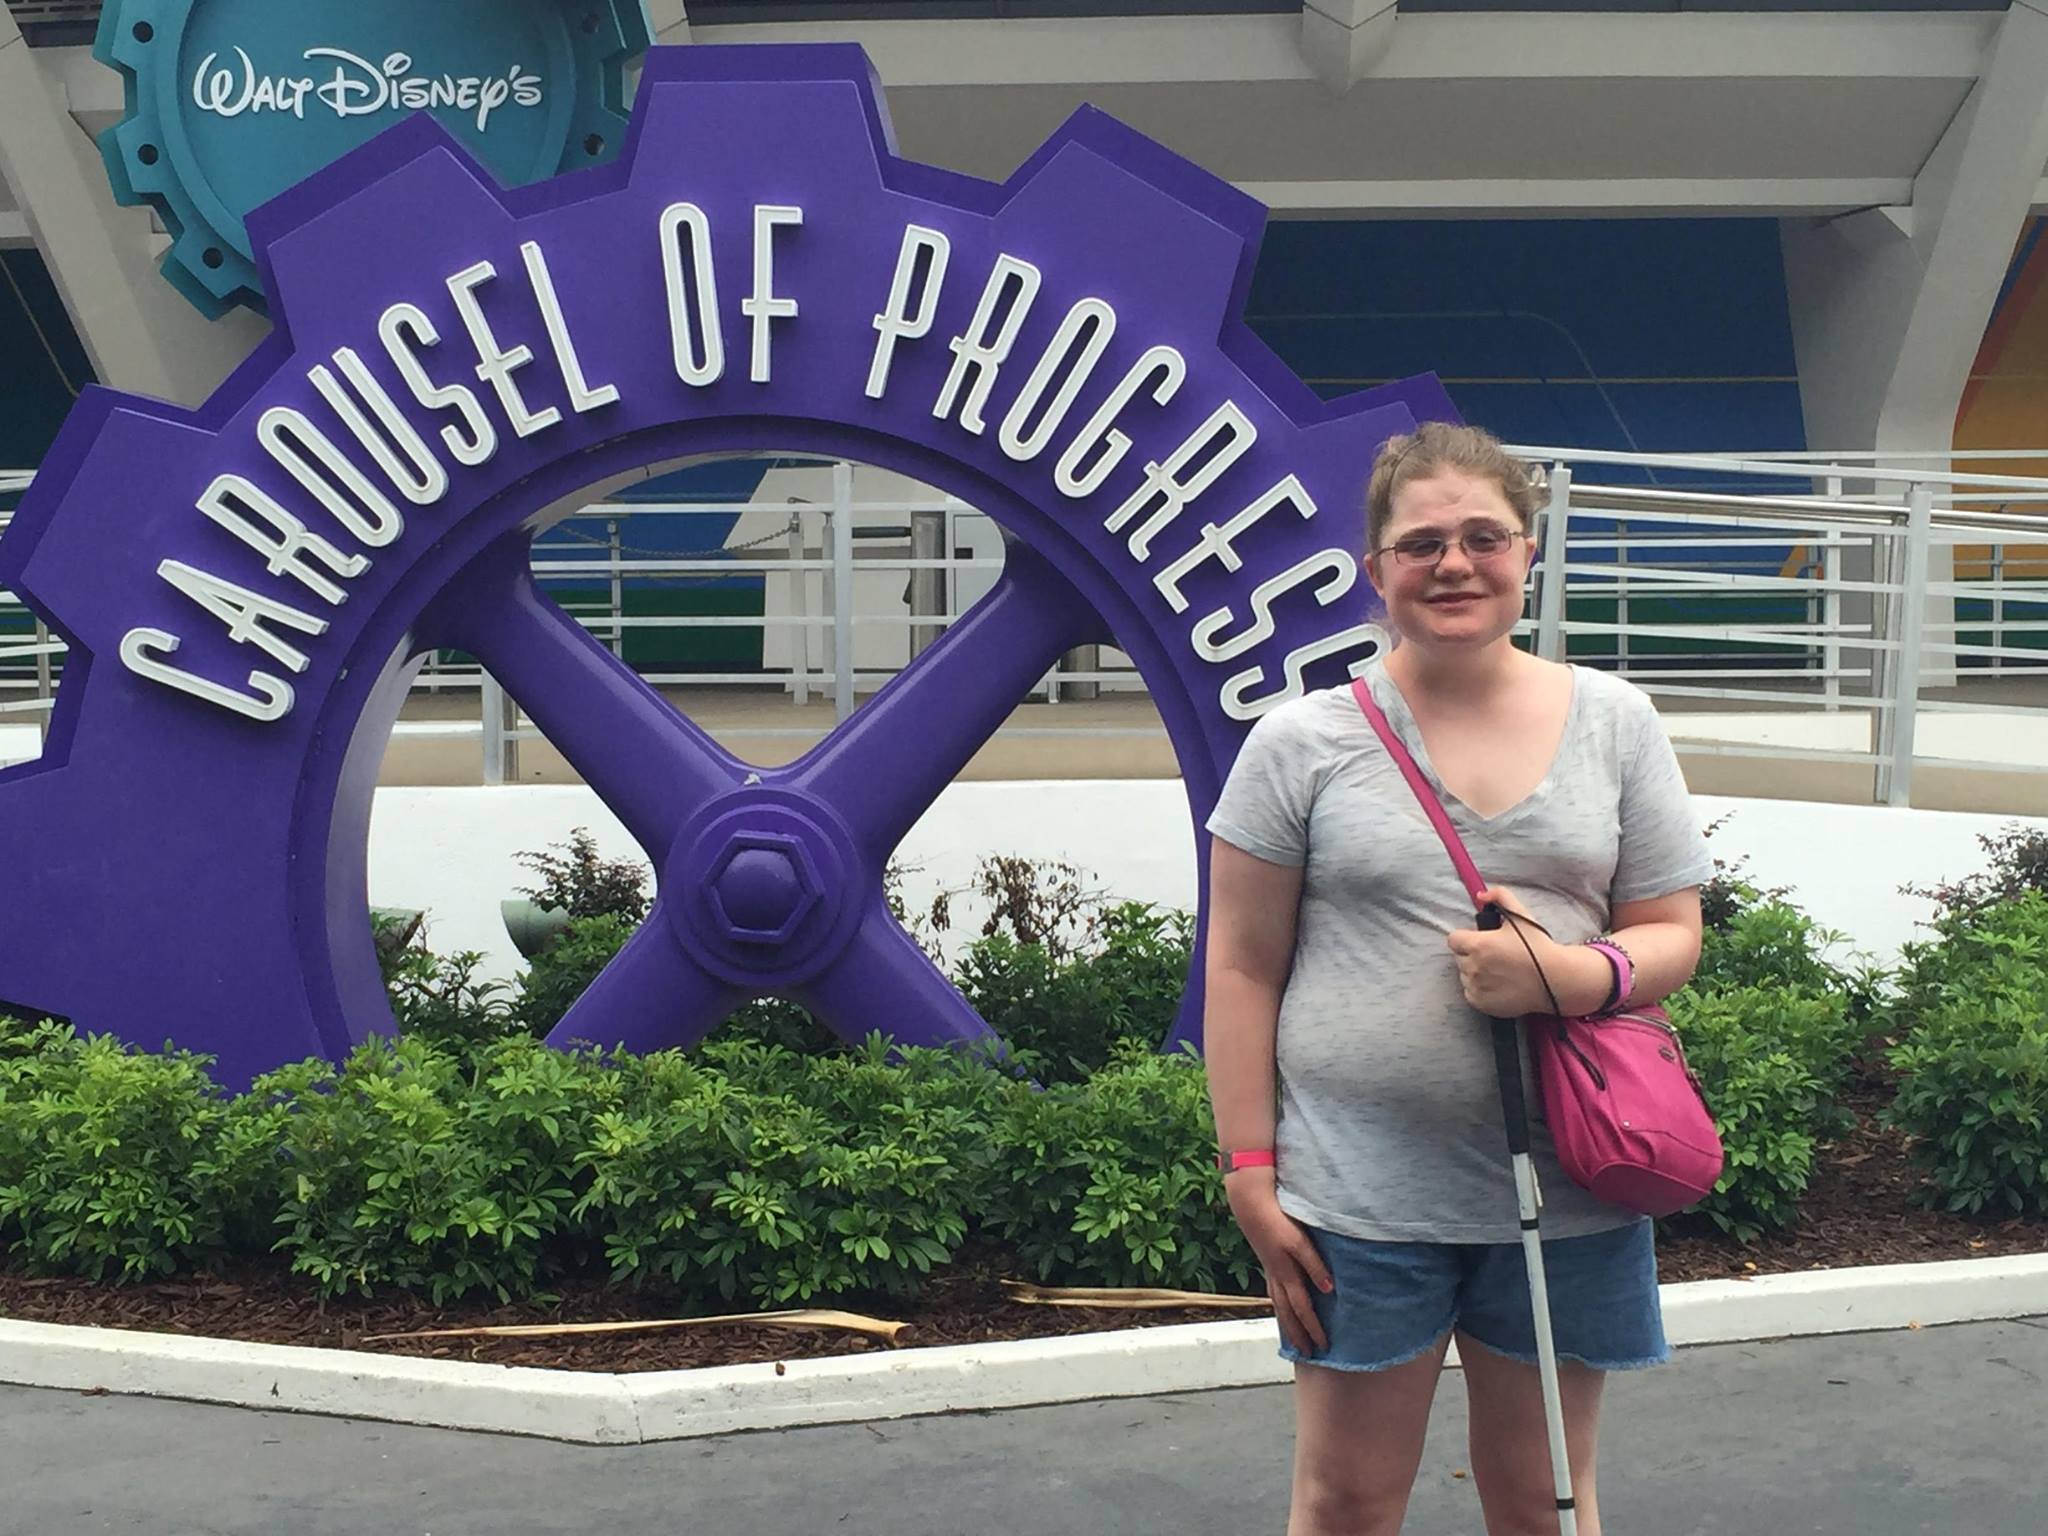 A girl with a grey shirt, shorts, pink bag, and glasses stands in front of a purple gear that says Carousel of Progress and a Walt Disney